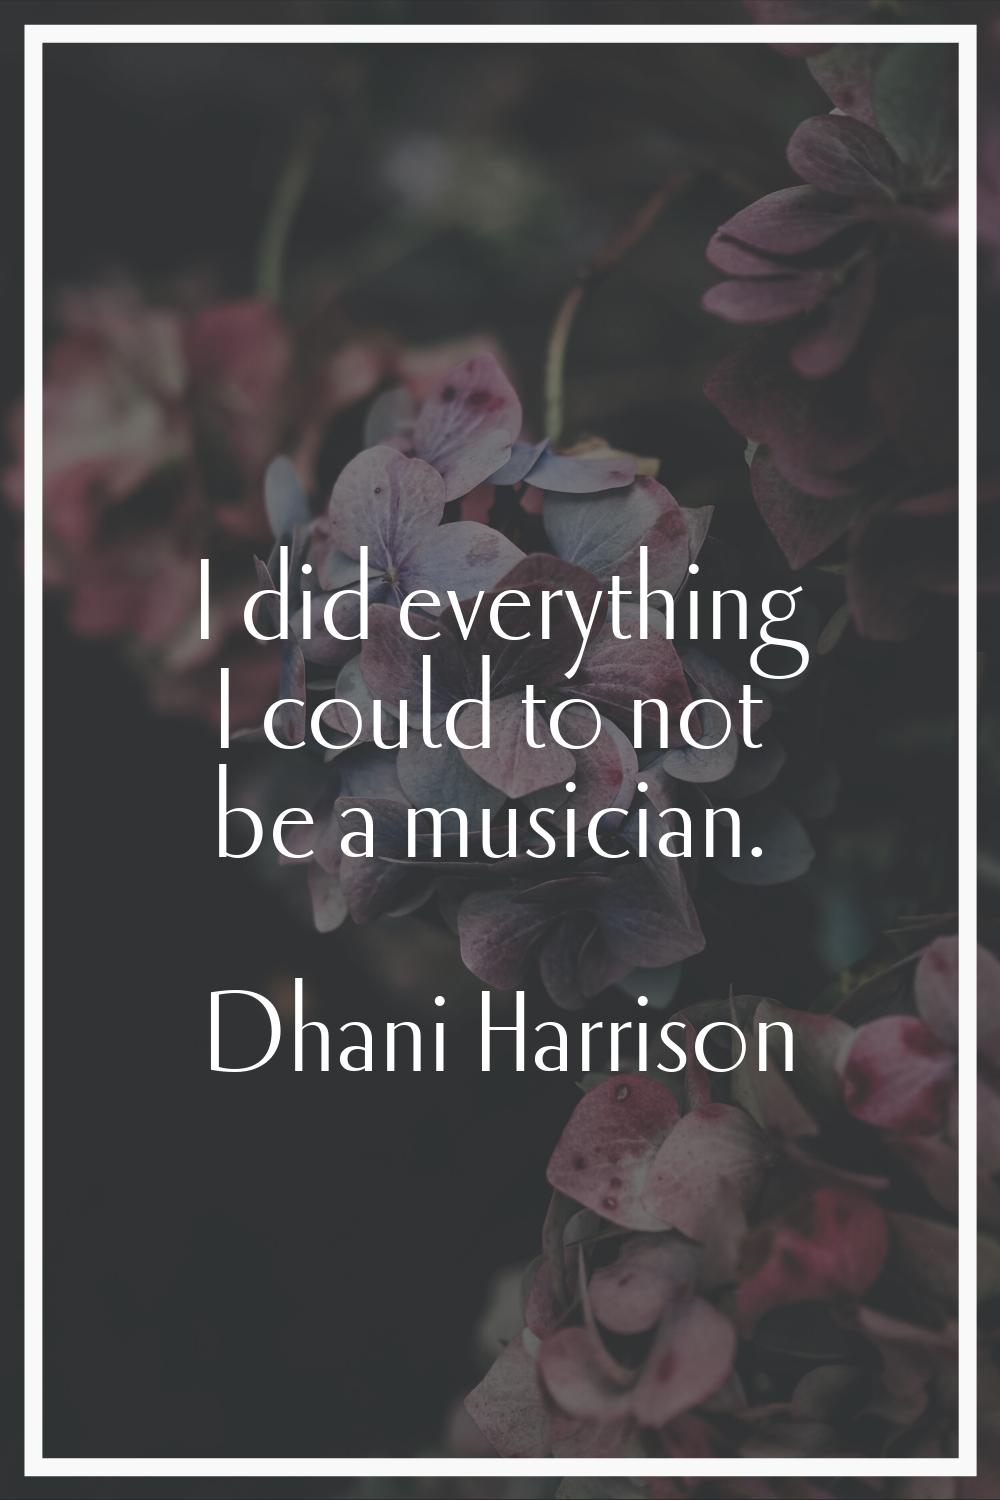 I did everything I could to not be a musician.